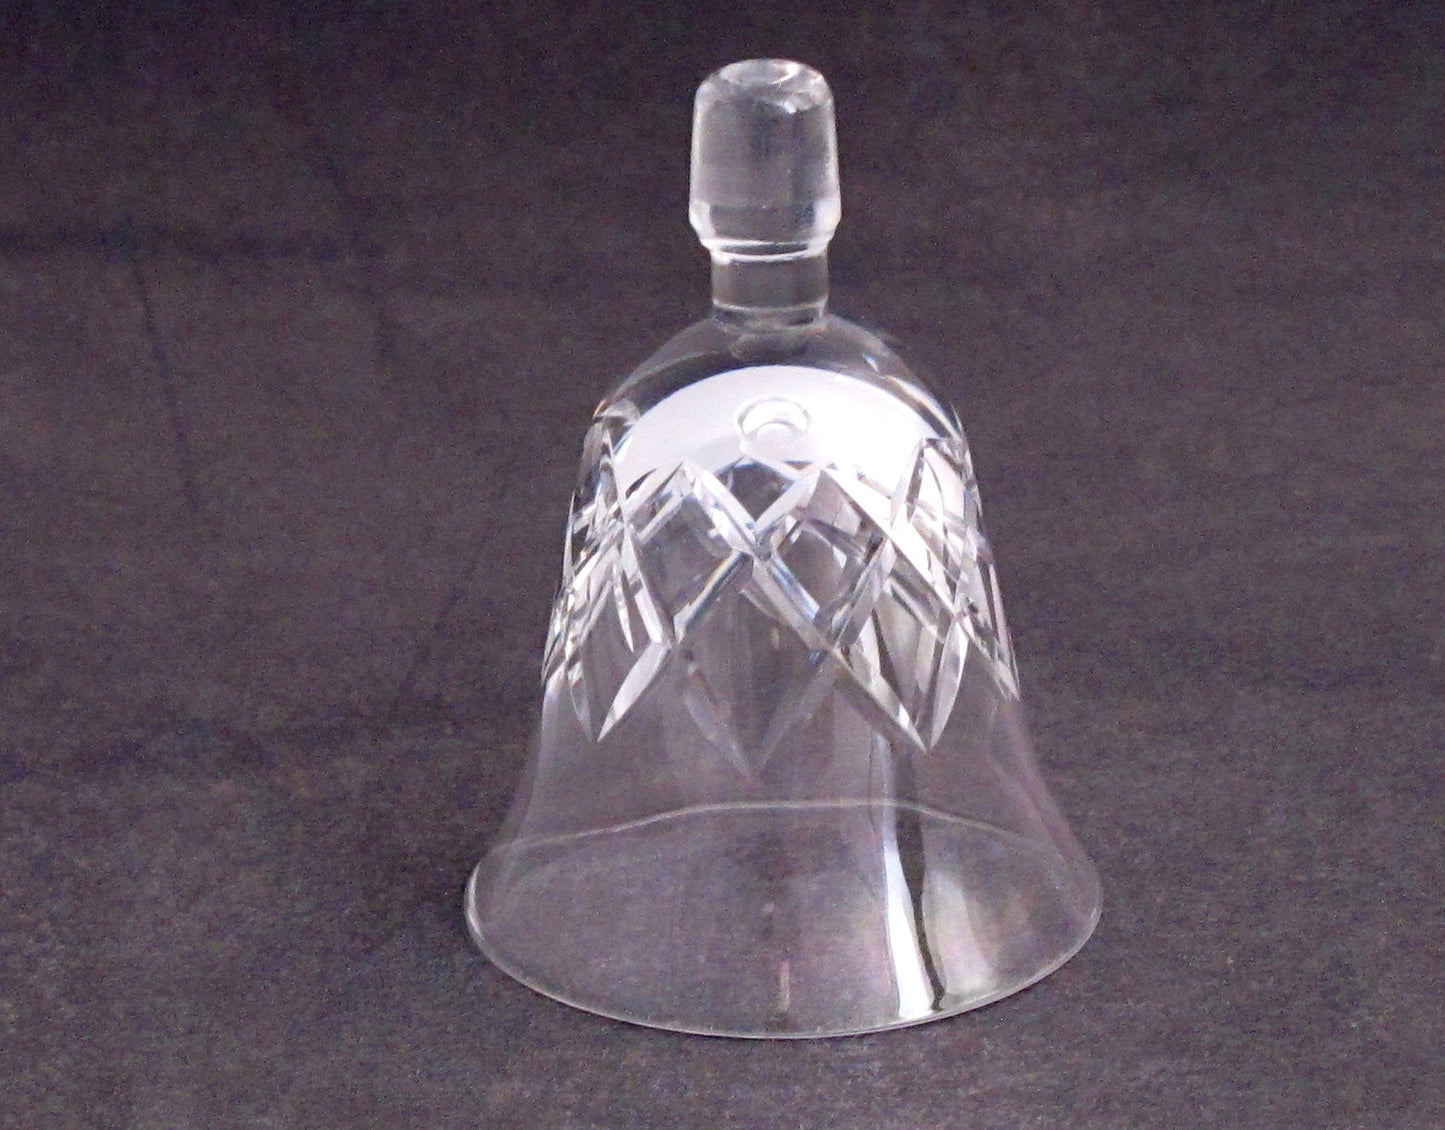 Wine glass  glass taster  stopper  hand cut crystal - O'Rourke crystal awards & gifts abp cut glass